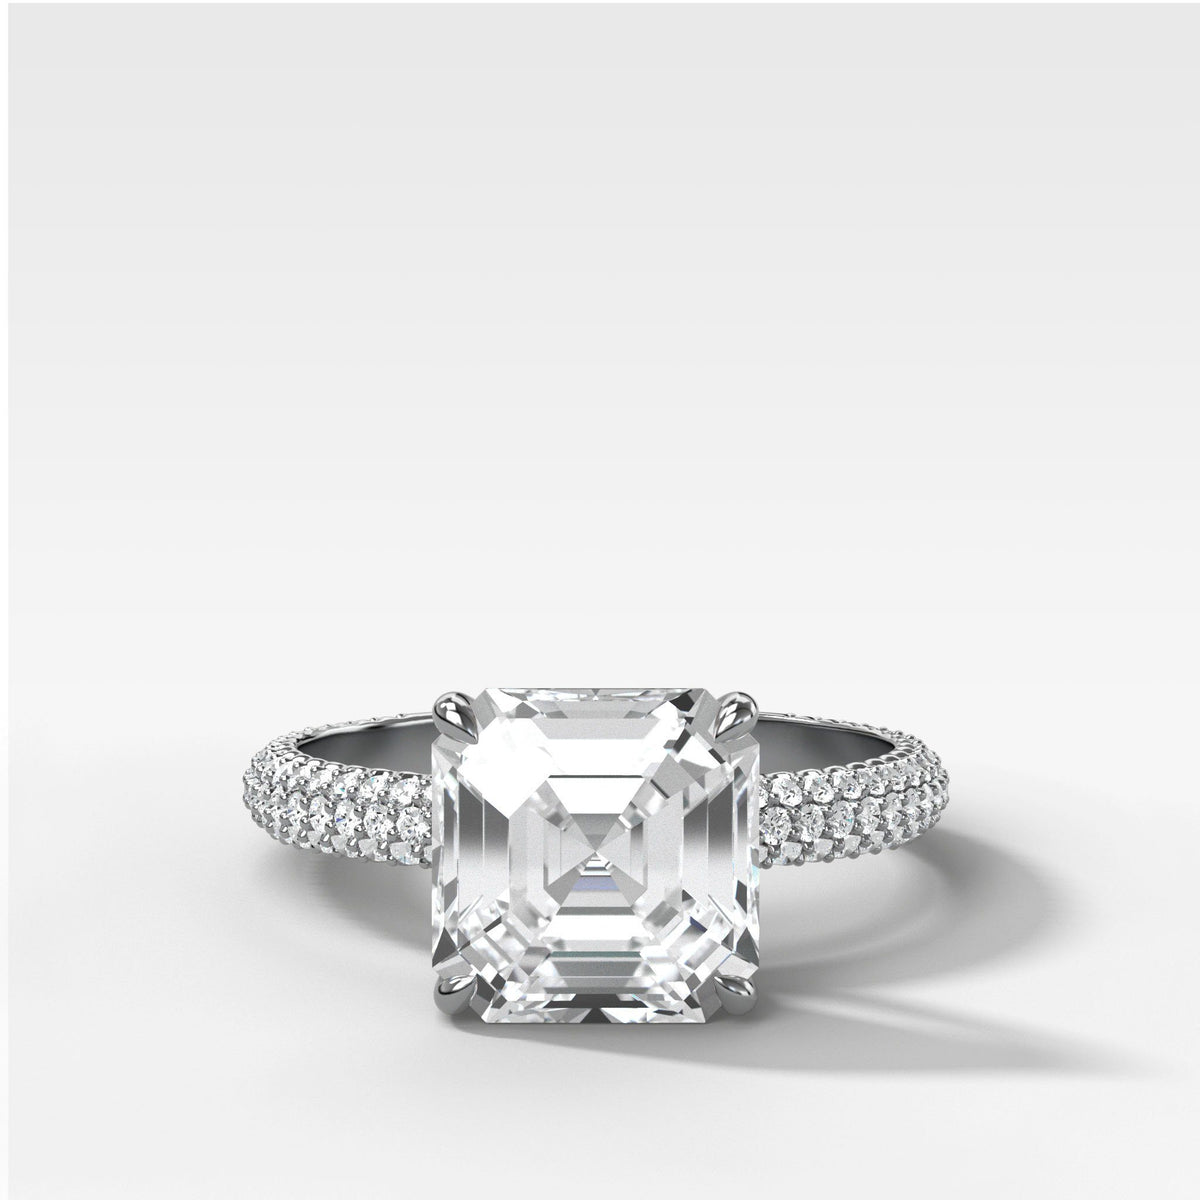 Triple Row Pav≈Ω Engagement Ring With Asscher Cut by Good Stone in White Gold